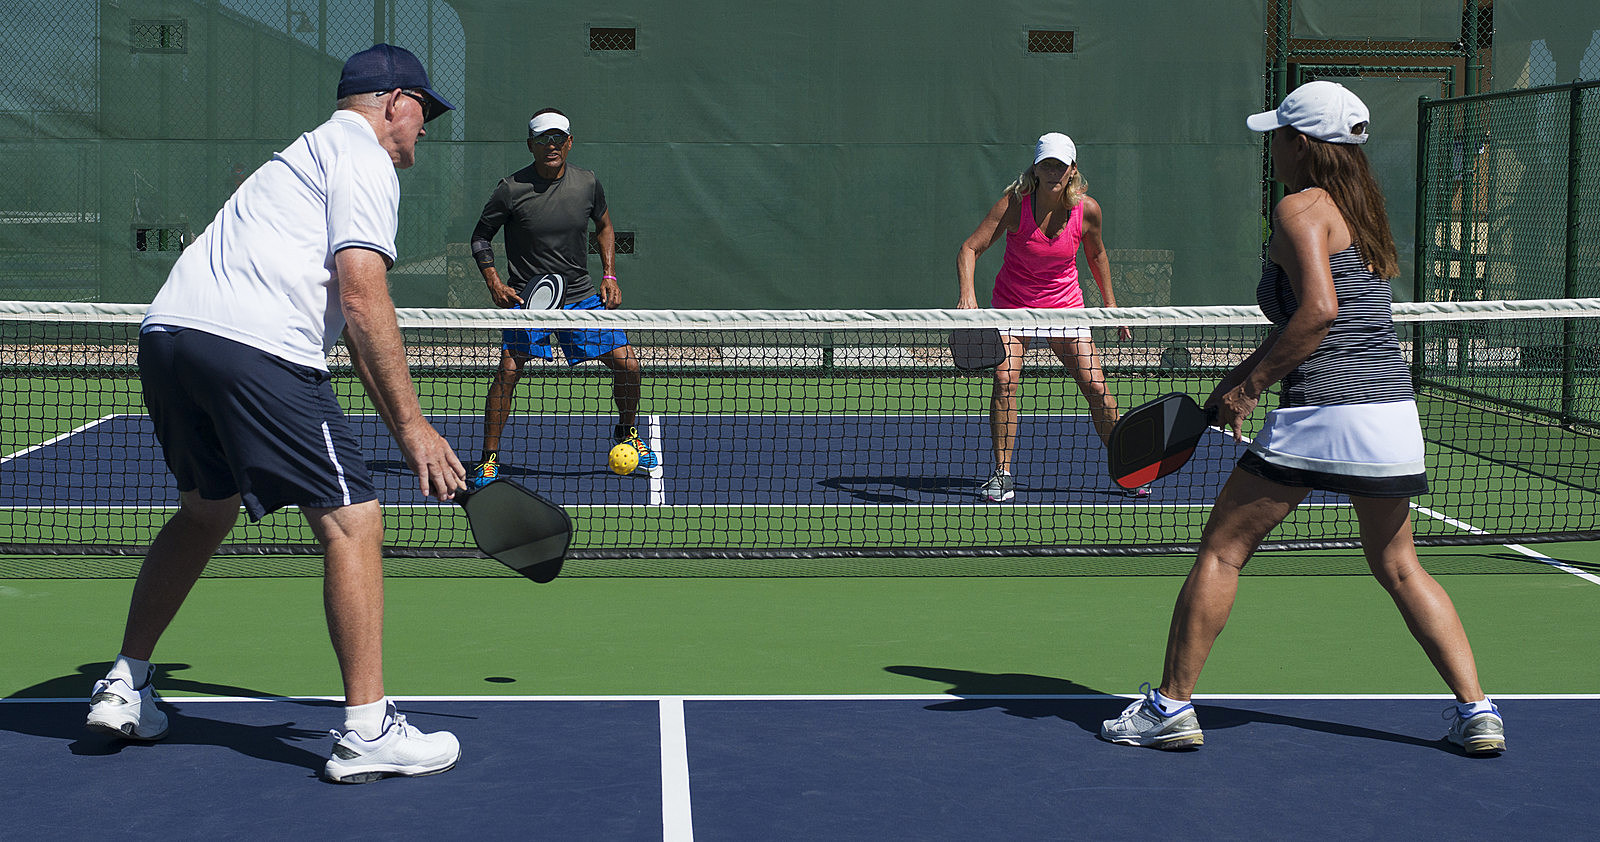 colorful action image of mixed doubled Pickleball match play